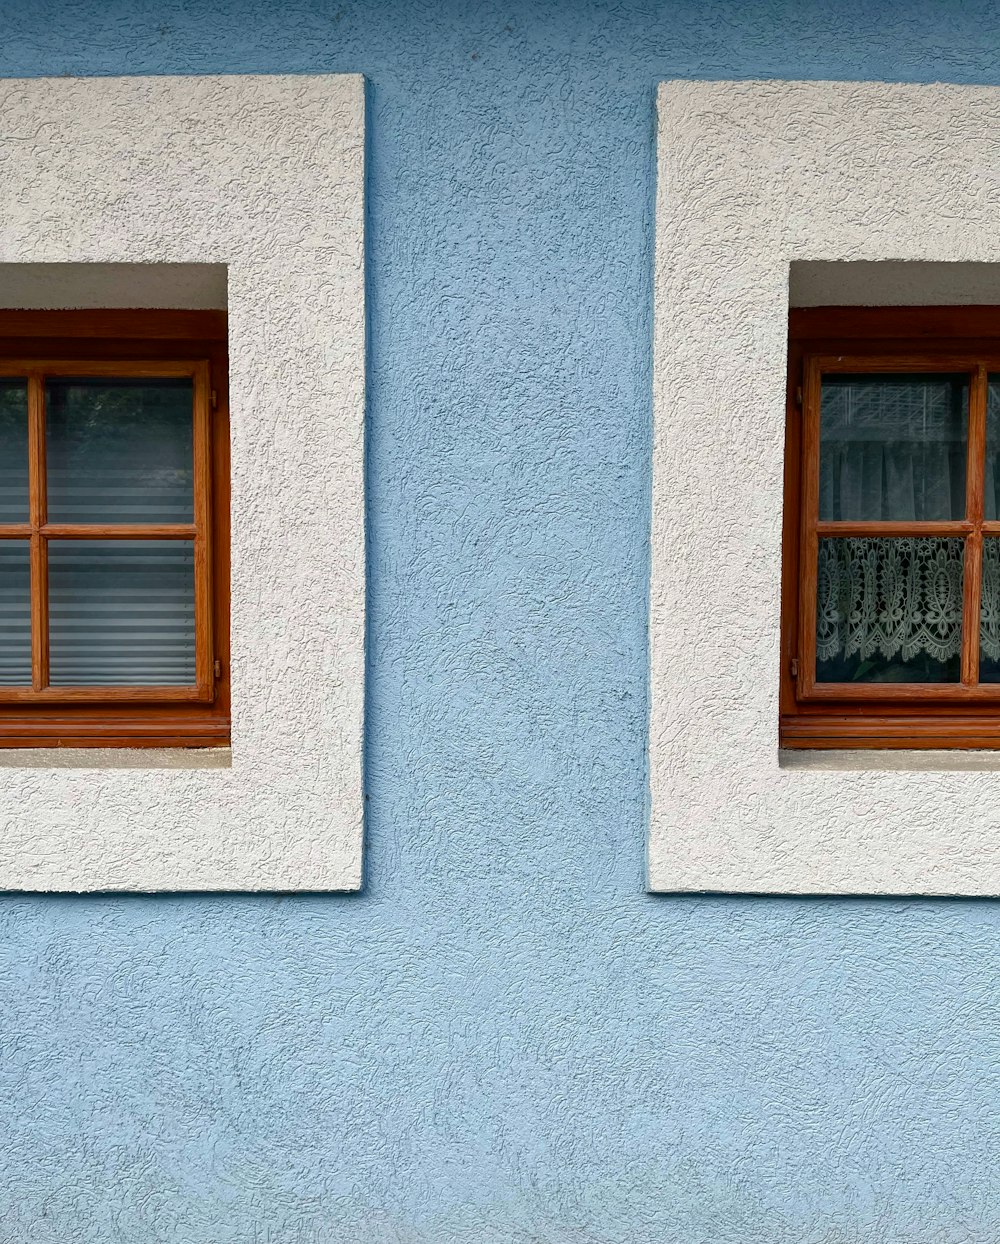 a couple of windows sitting on the side of a building